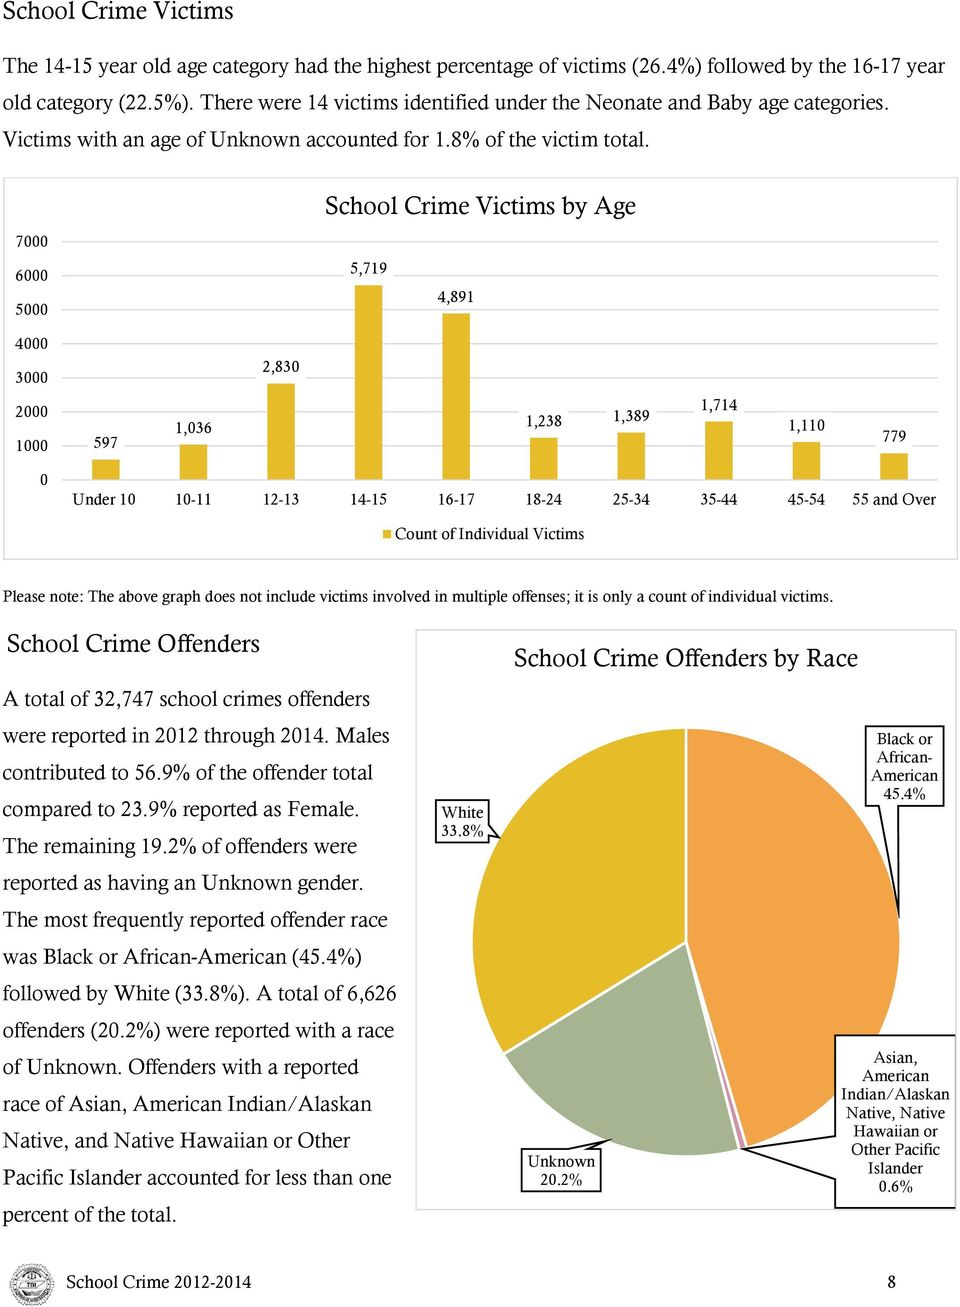 School Crime Victims by Age 7000 6000 5000 5,719 4,891 4000 3000 2,830 2000 1000 597 1,036 1,238 1,389 1,714 1,110 779 0 Under 10 10-11 12-13 14-15 16-17 18-24 25-34 35-44 45-54 55 and Over Count of